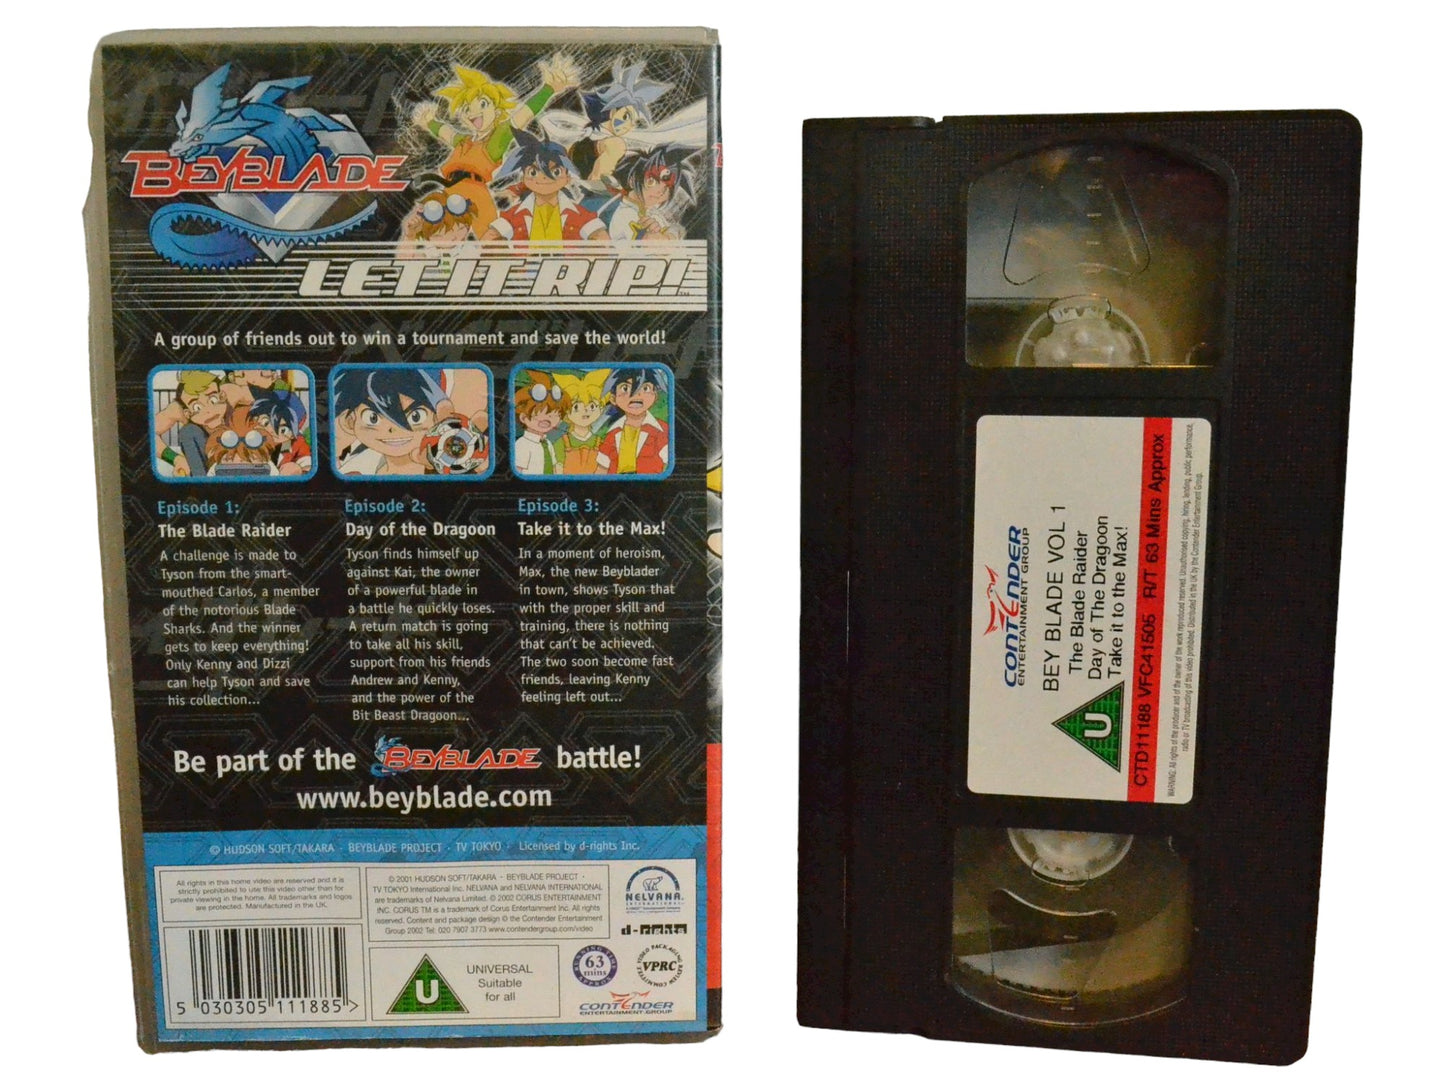 Beyblade - Let it RIP! - Volume 1 - Contender Entertainment Group - Childrens - PAL - VHS-